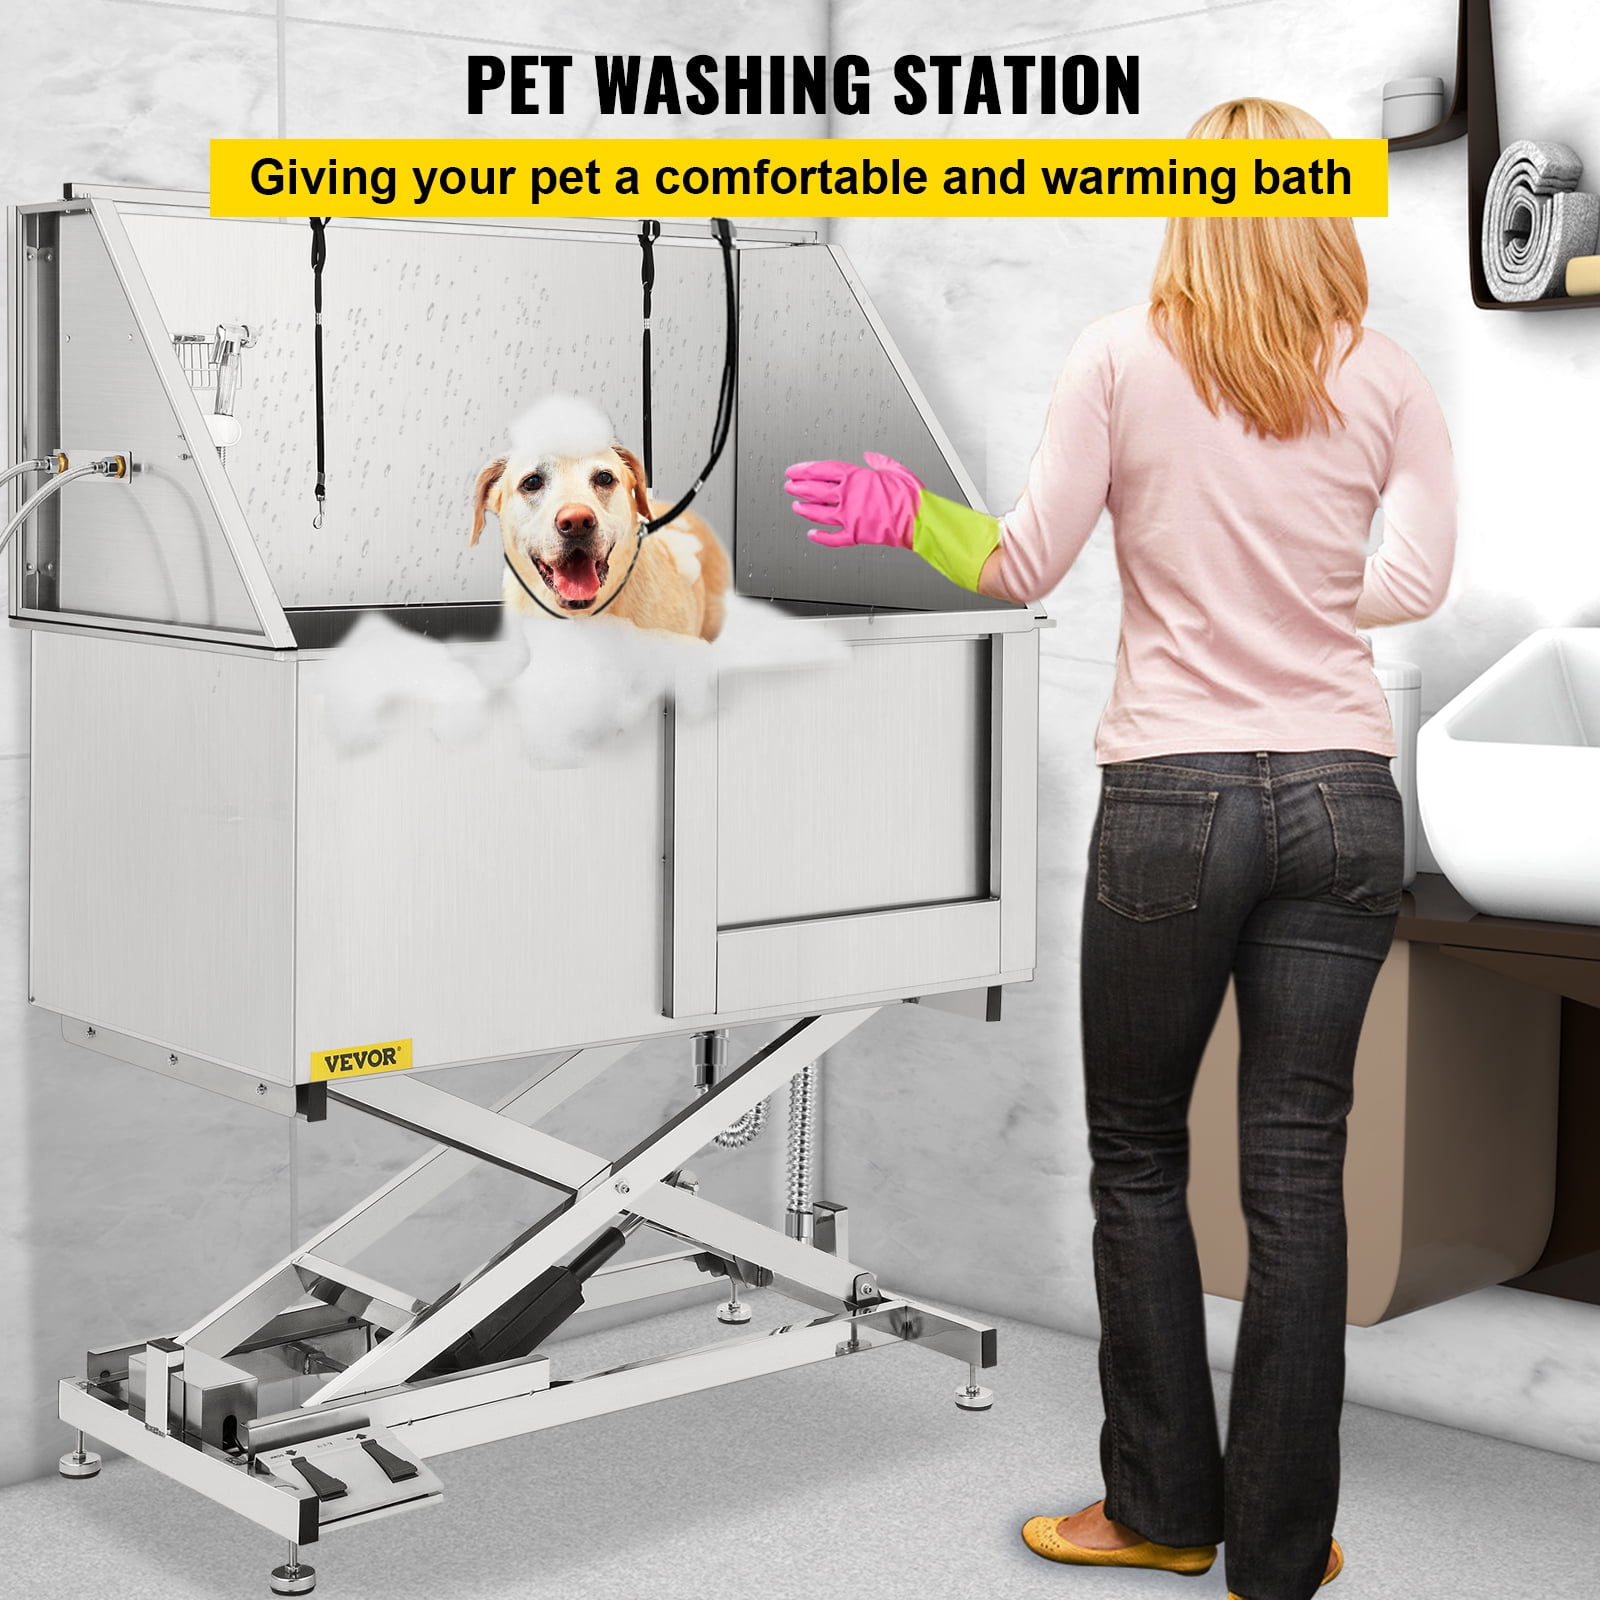 CO-Z 50 Stainless Steel Dog Washing Station for Large Dogs, Dog Grooming  Tub for Home, Professional Dog Bathtub Bathing Station, Pet Wash Station